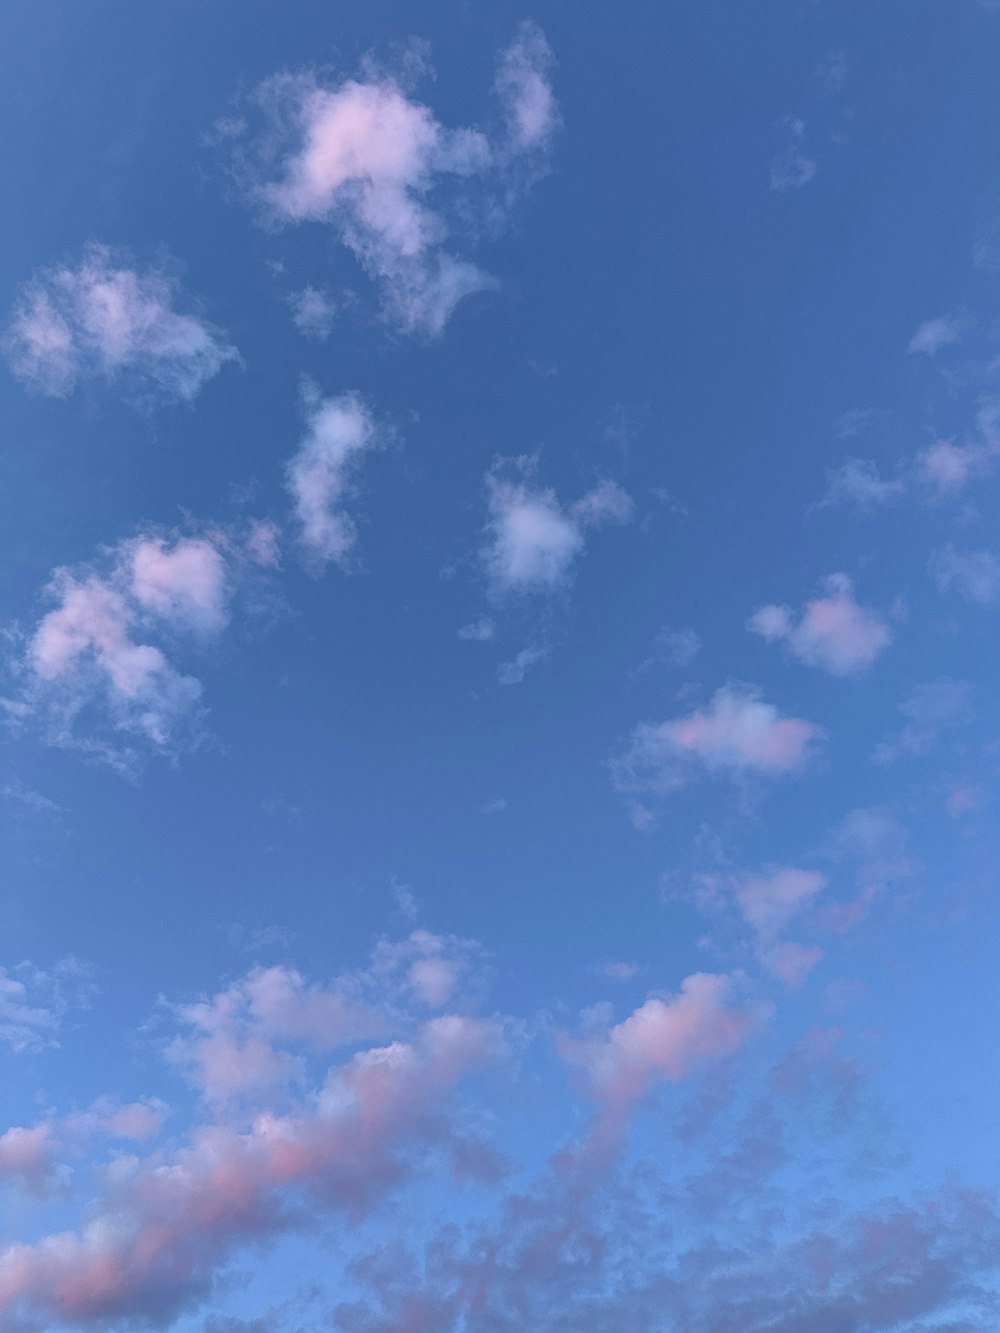 a plane flying through a blue sky with clouds